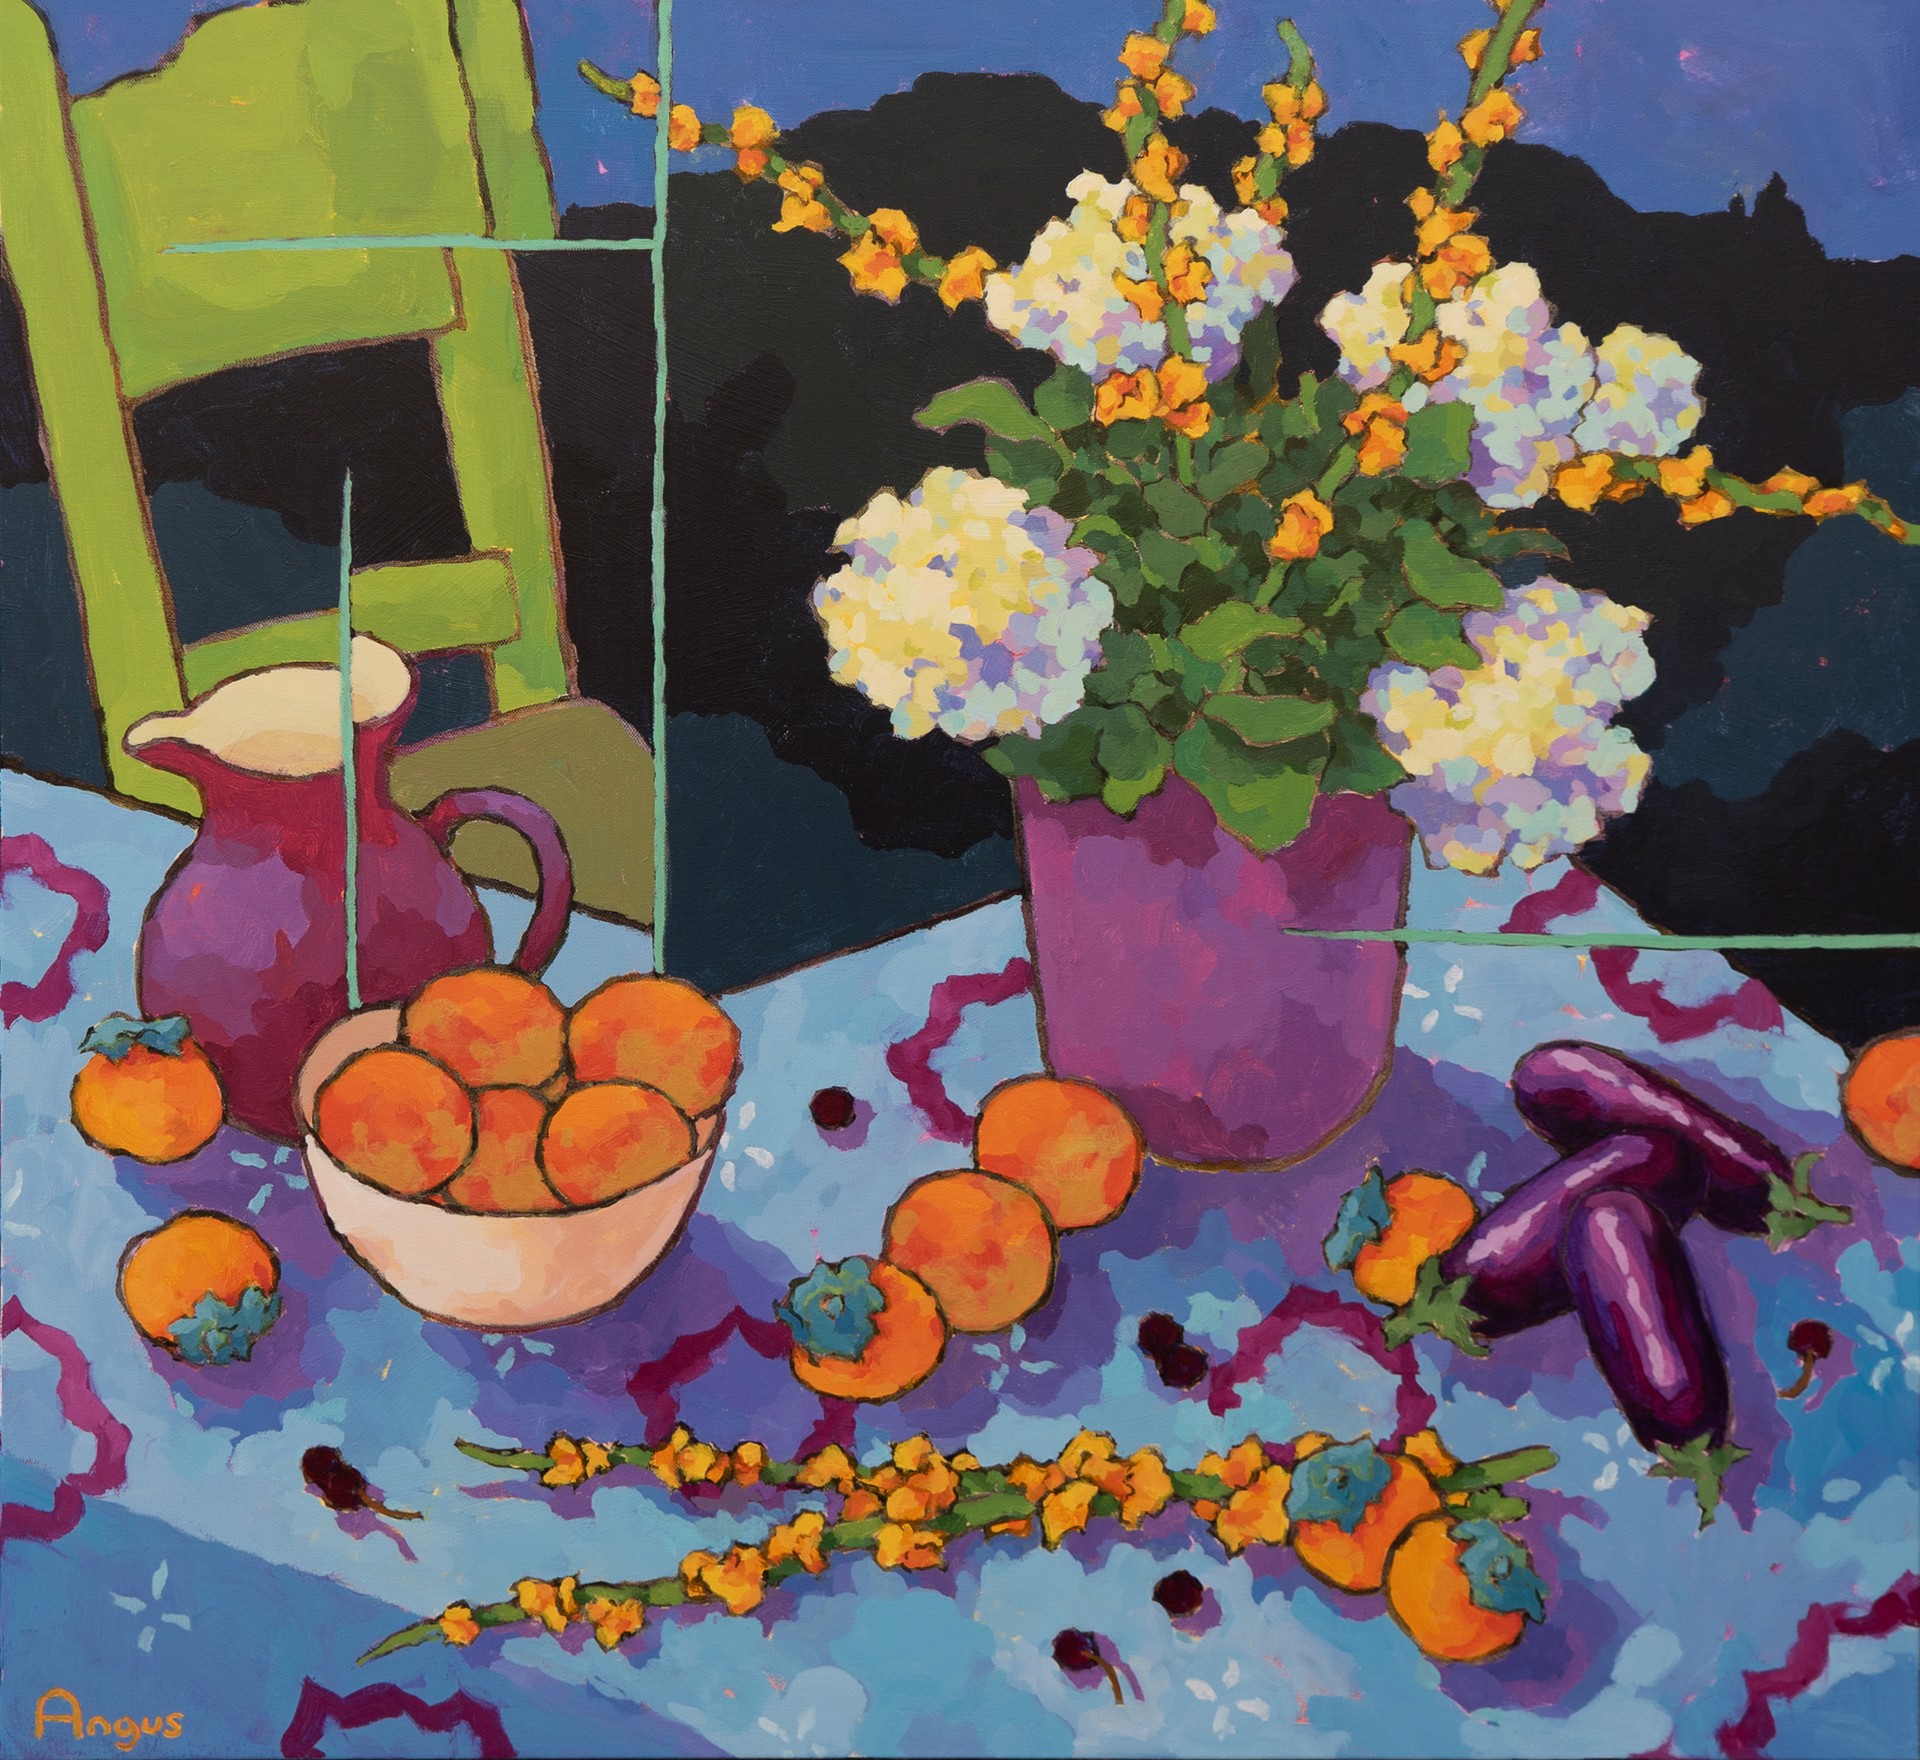 Persimmon & Oranges with Hydrangeas by Angus